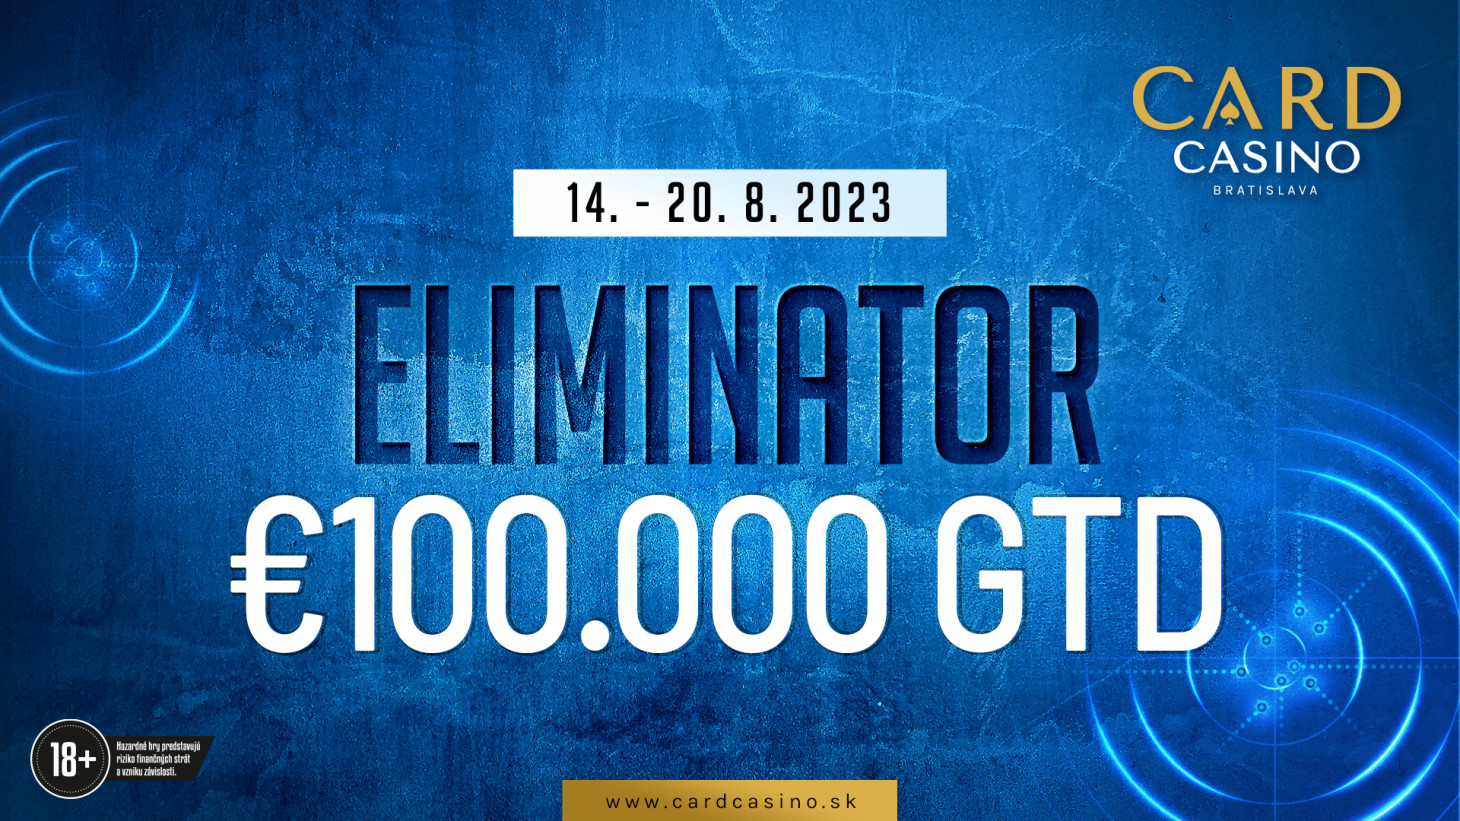 August will be marked by K.O. An attractive €100,000 ELIMINATOR awaits players